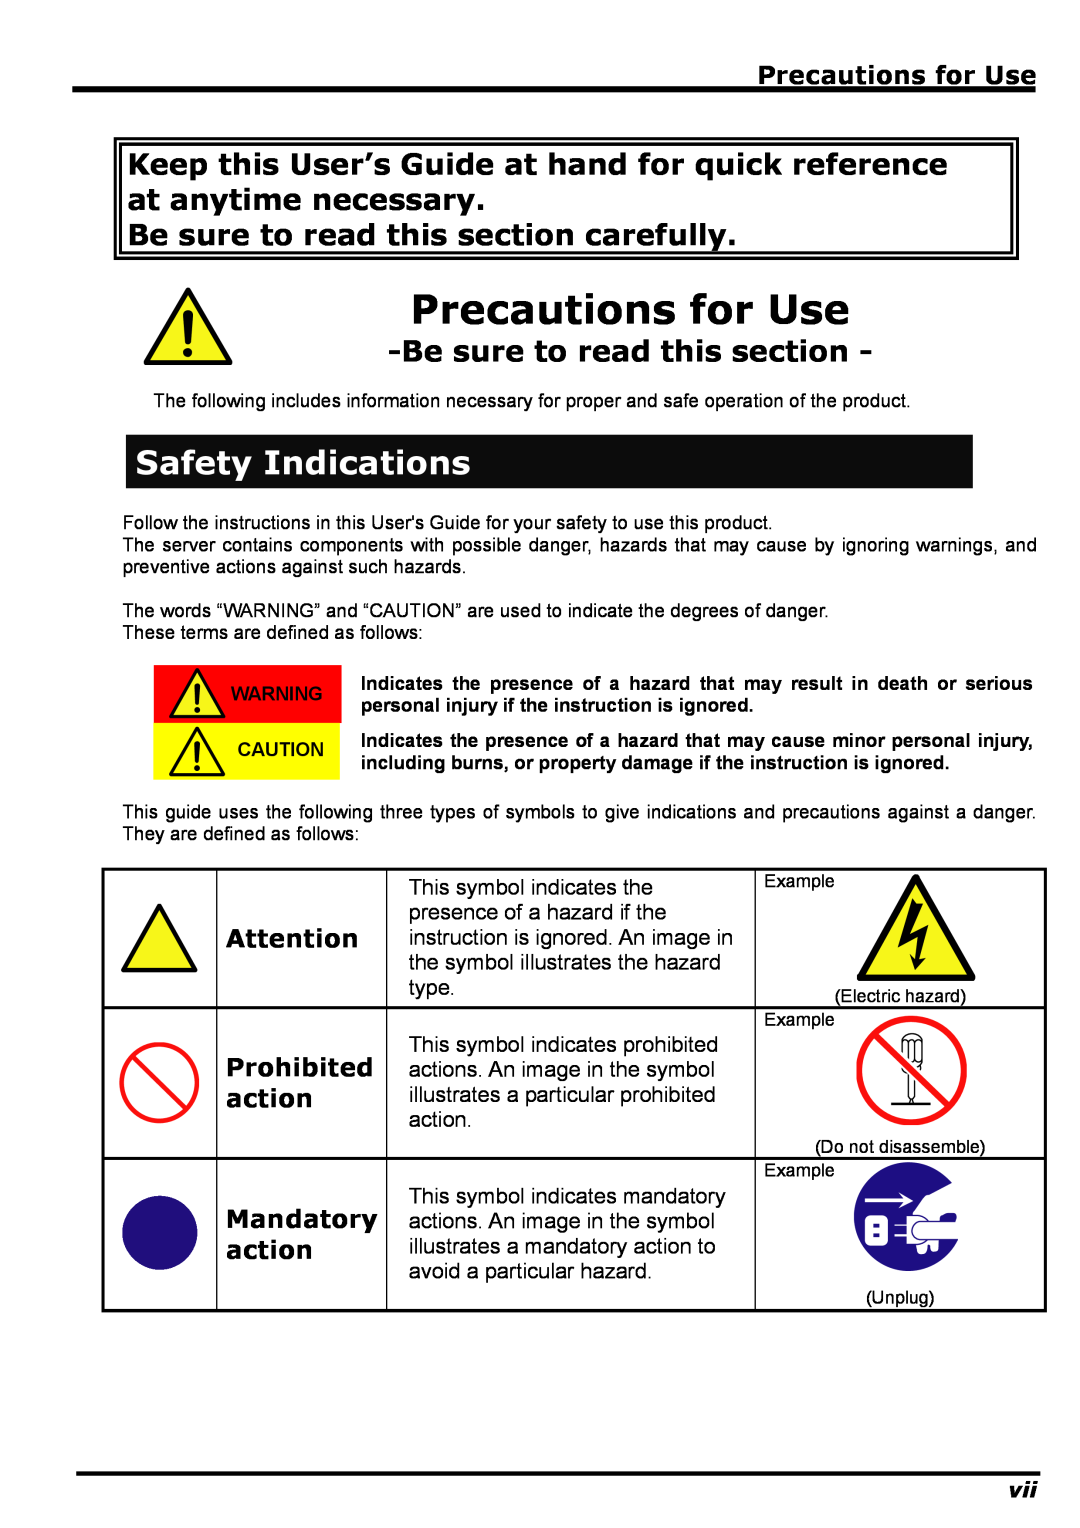 NEC N8406-022 manual Precautions for Use, Safety Indications, Be sure to read this section carefully, Prohibited, action 